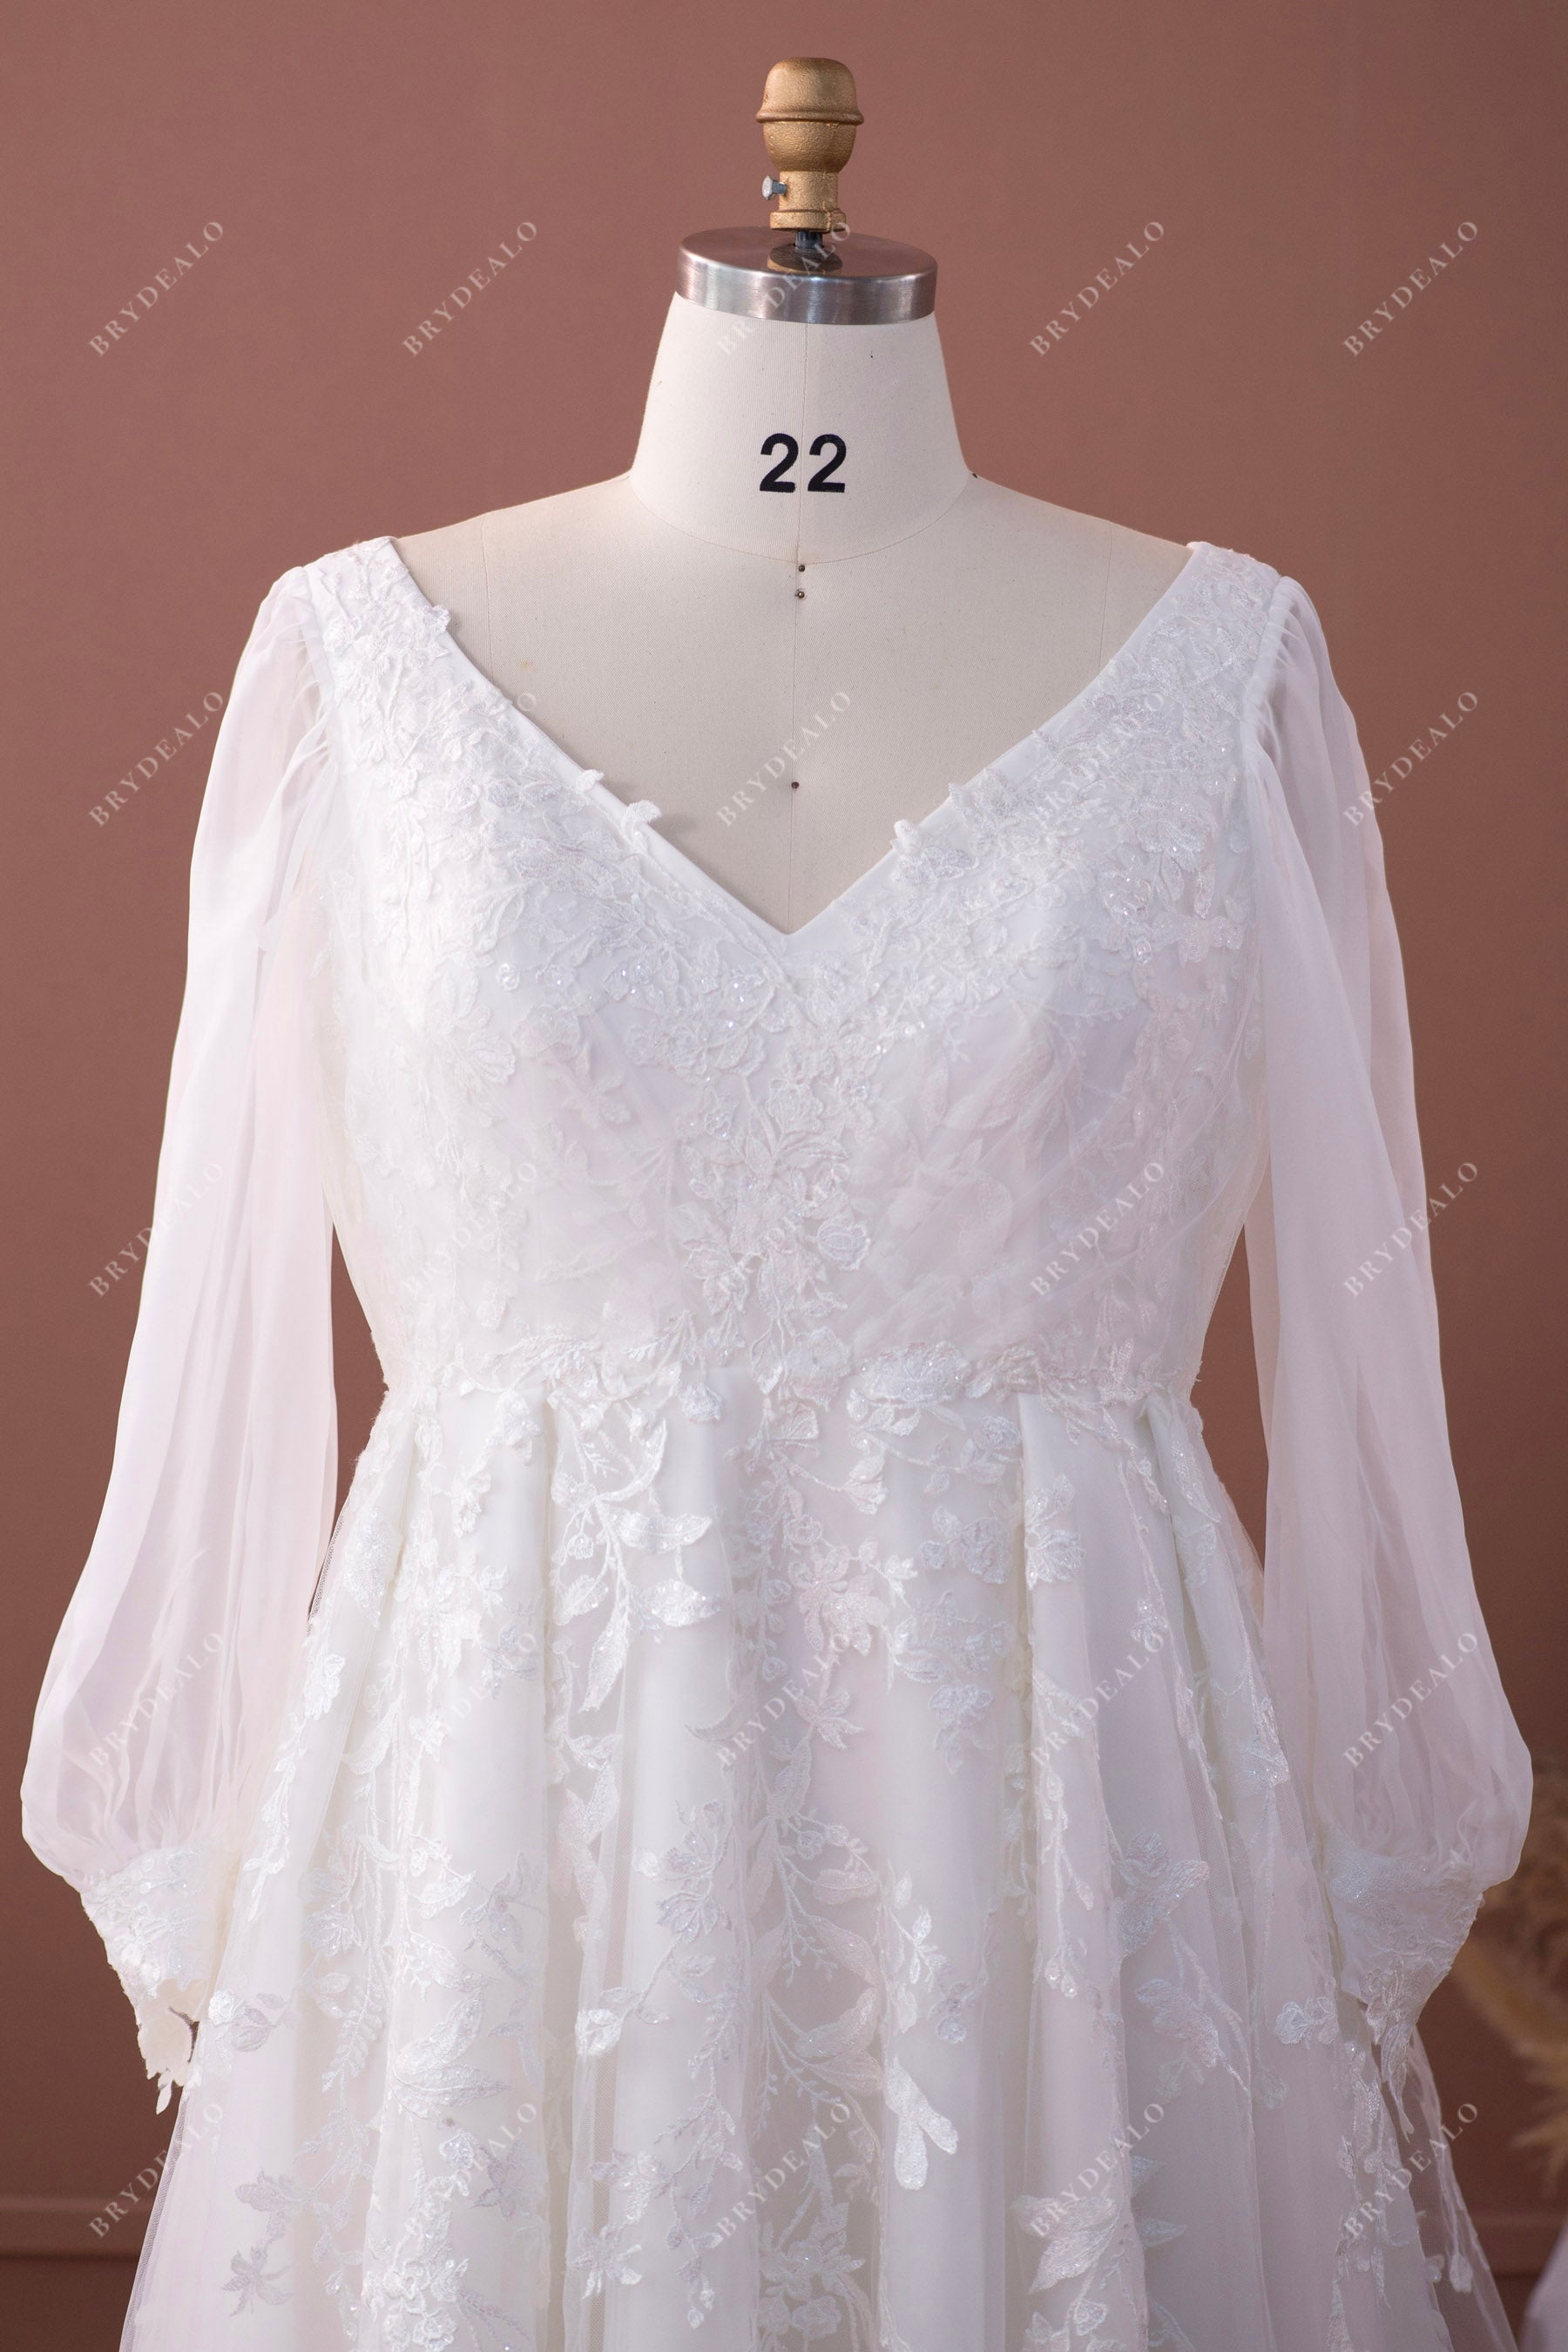 V-neck sleeves lace wedding gown